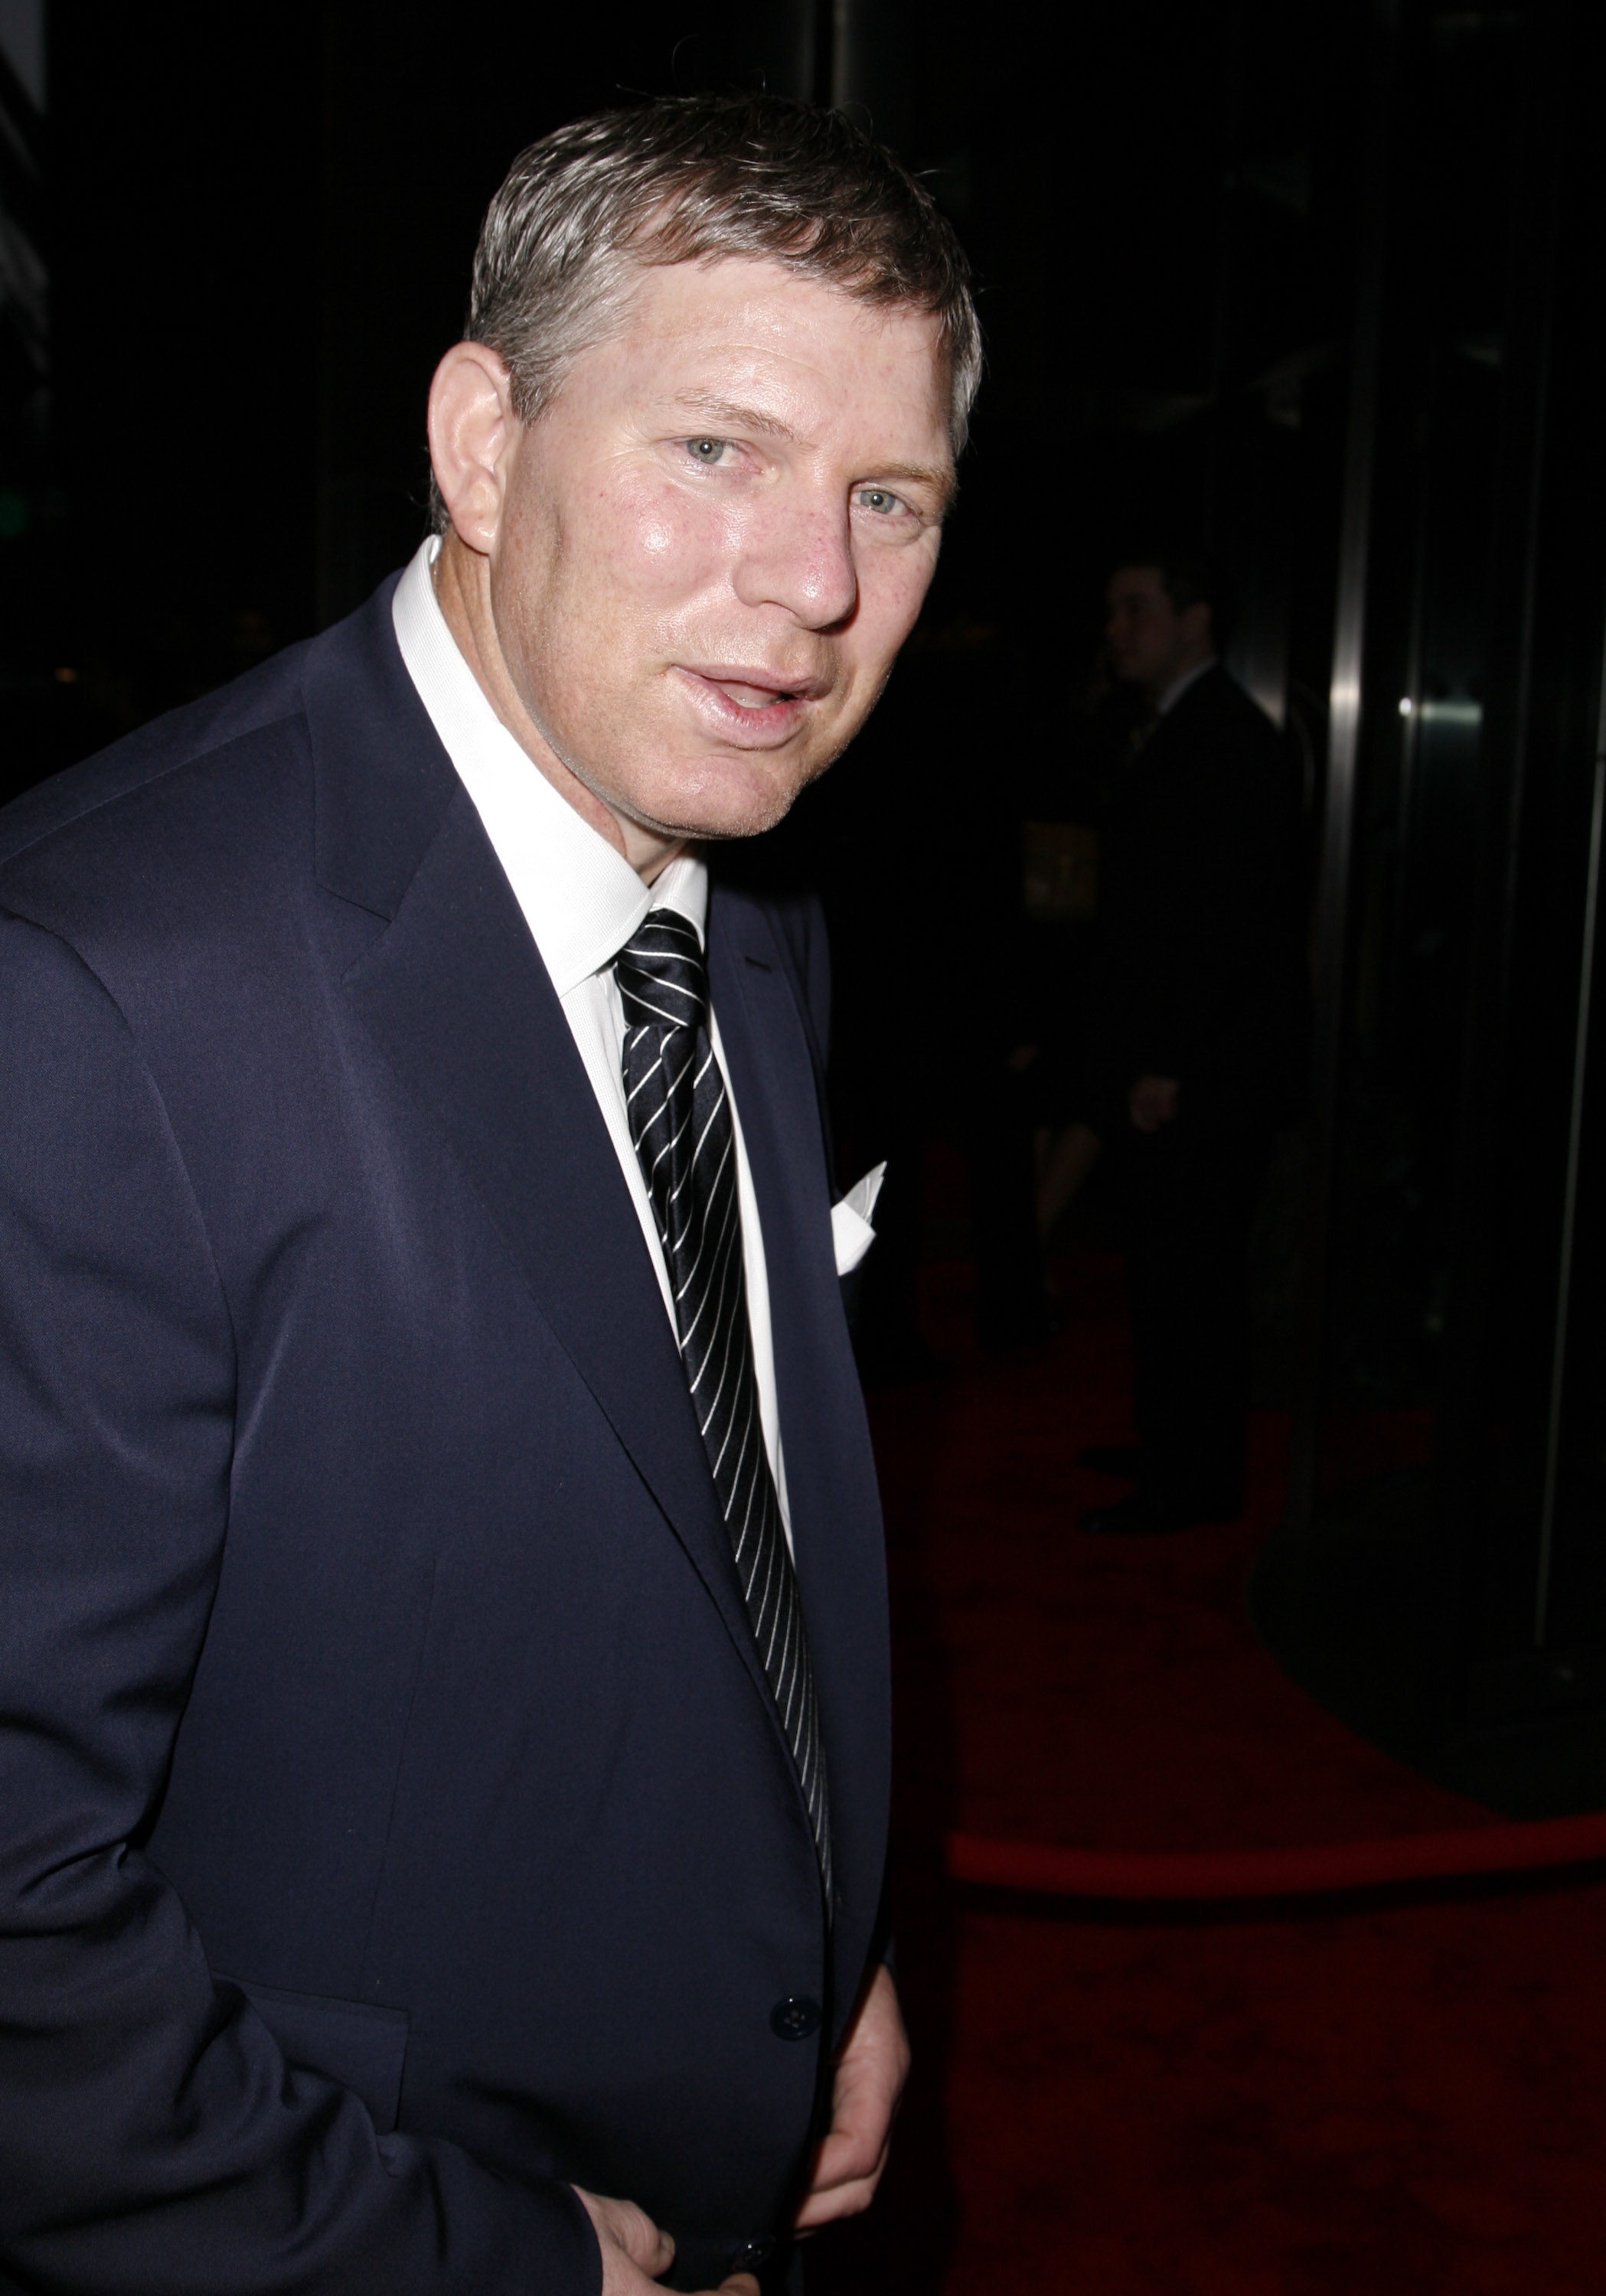 NEW YORK - APRIL 1:   Lenny Dykstra attends the launch party for Players Club Magazine at the Mandarin Oriental Hotel on April 1, 2008 in New York City.  (Photo by Amy Sussman/Getty Images)